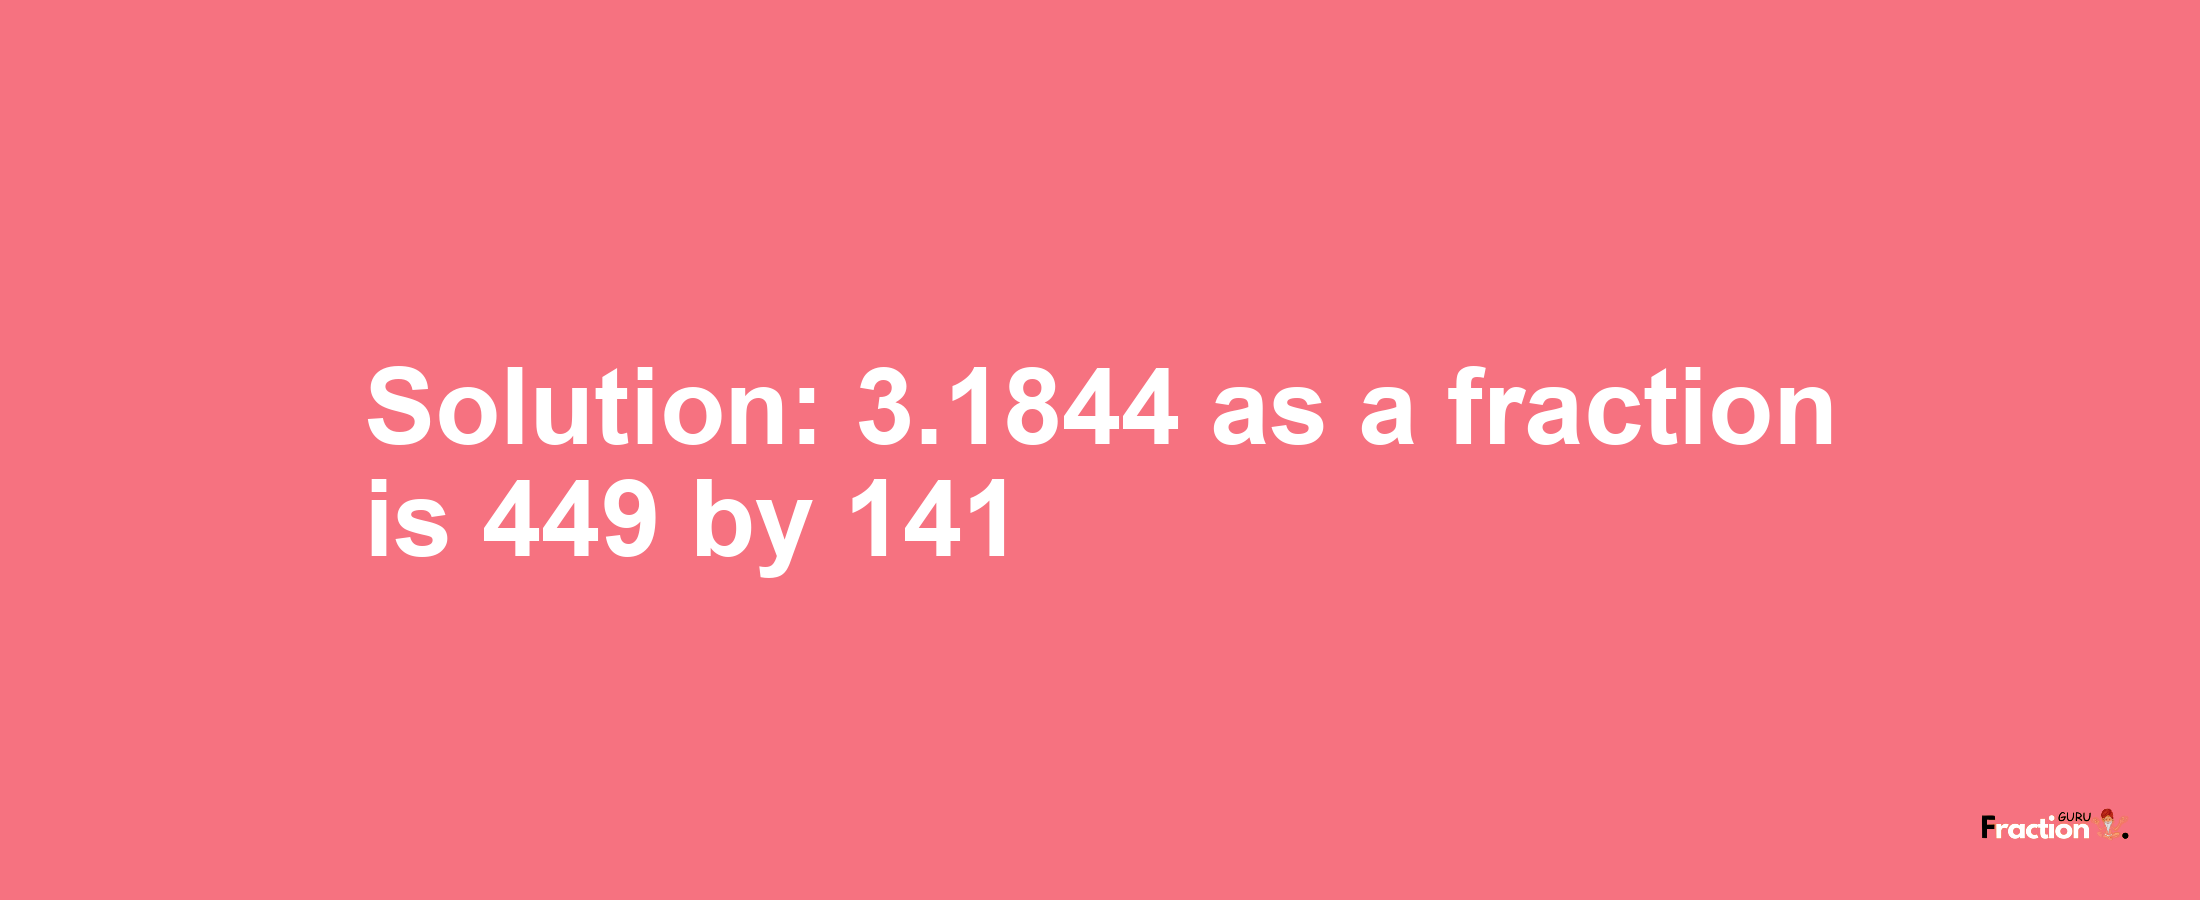 Solution:3.1844 as a fraction is 449/141